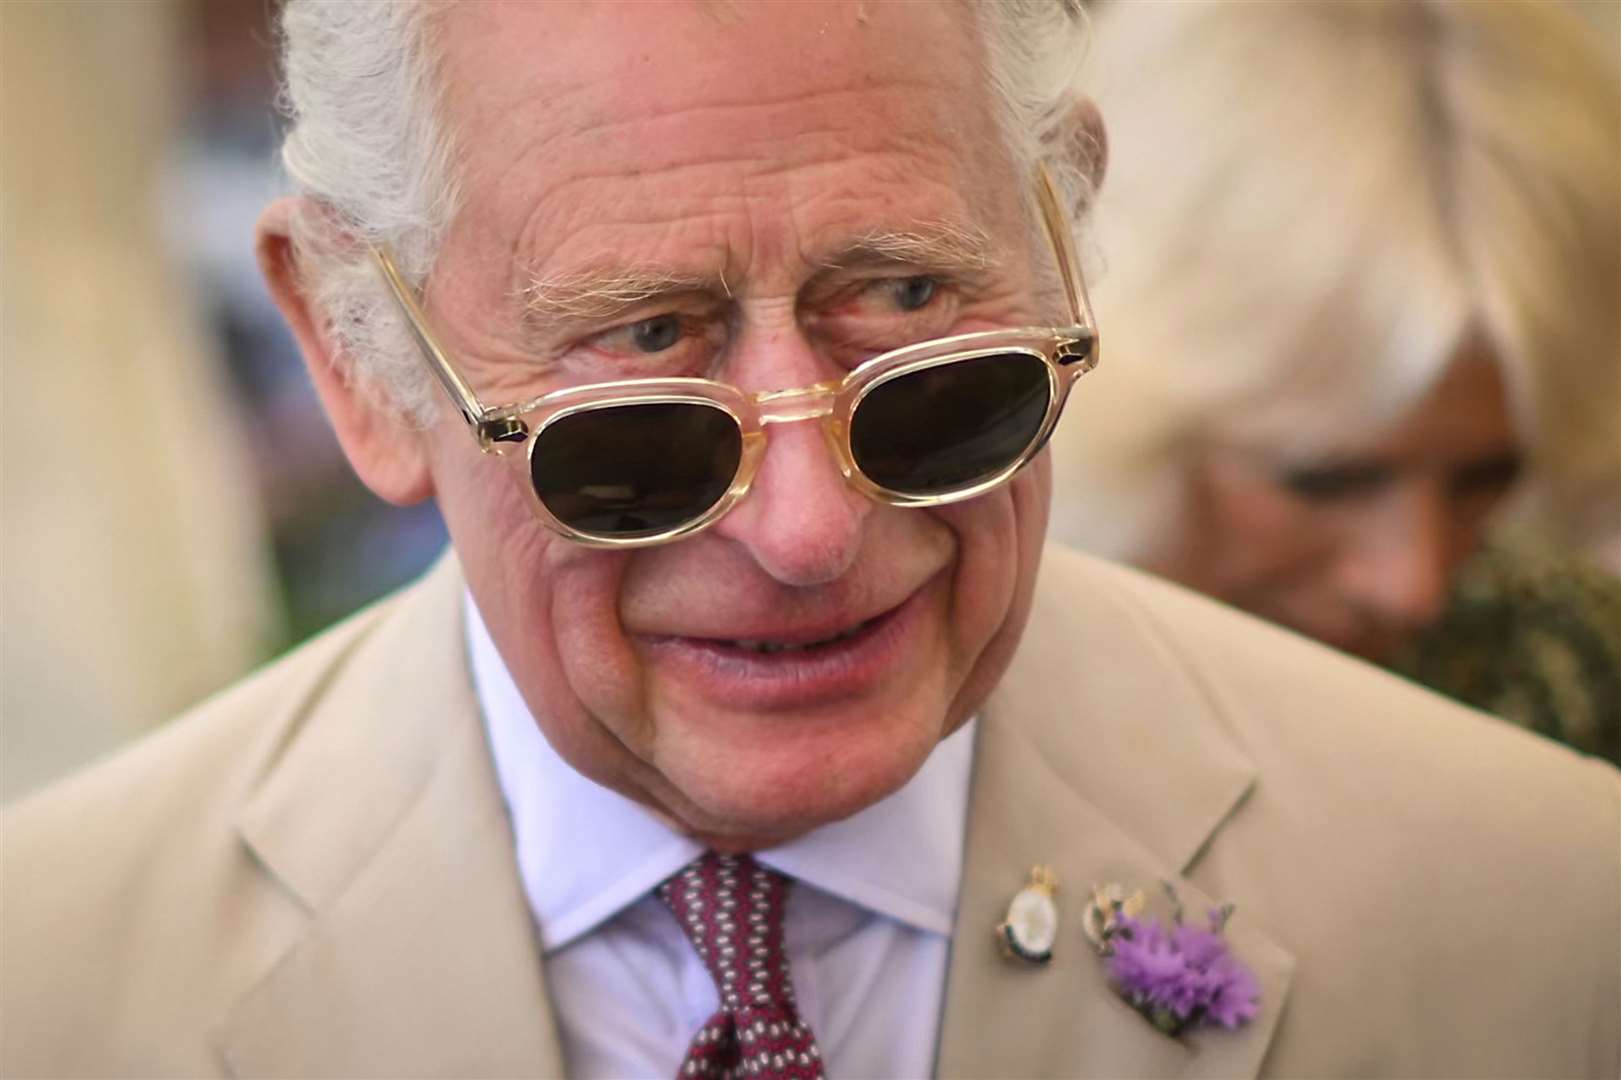 The King during a visit to the Sandringham Flower Show last year (Daniel Leal/PA)